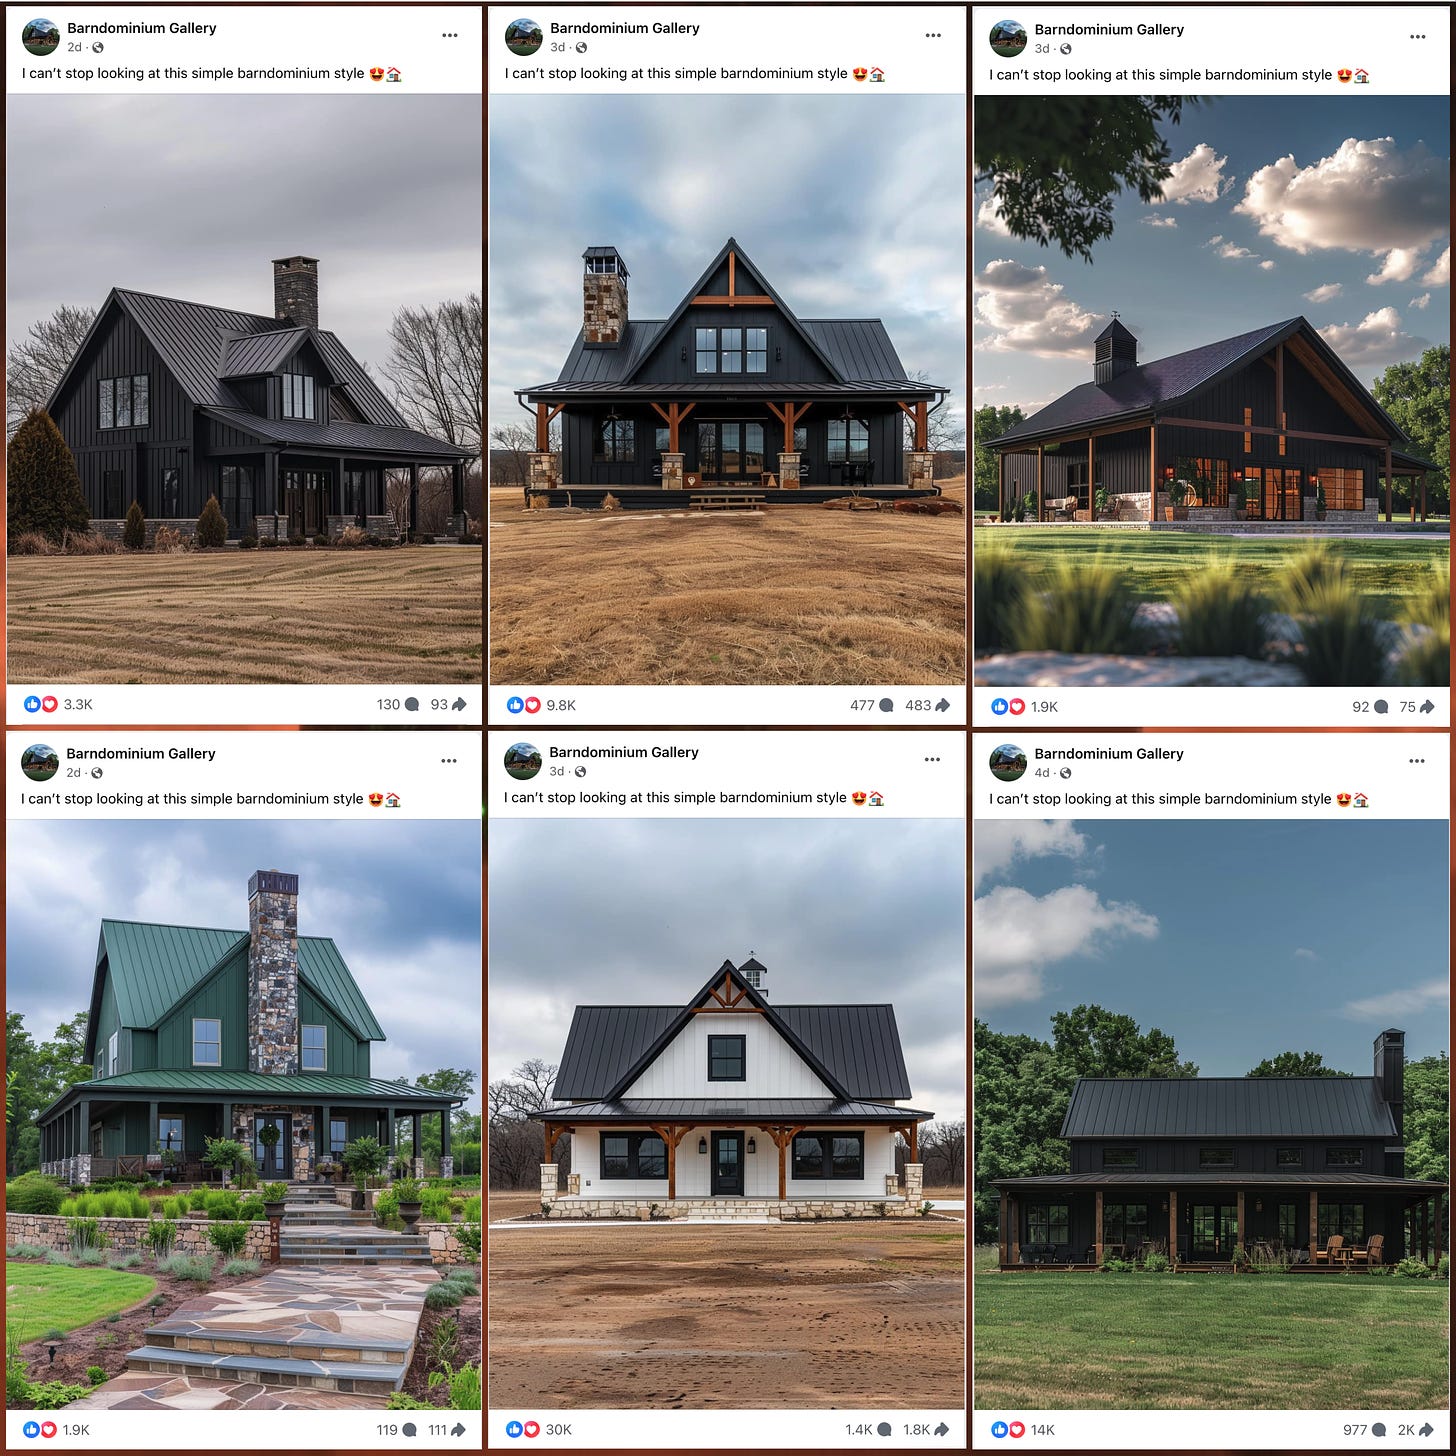 screenshots of six Facebook posts with the text "I can't stop looking at this simple barnominium style" and an AI-generated image of a house